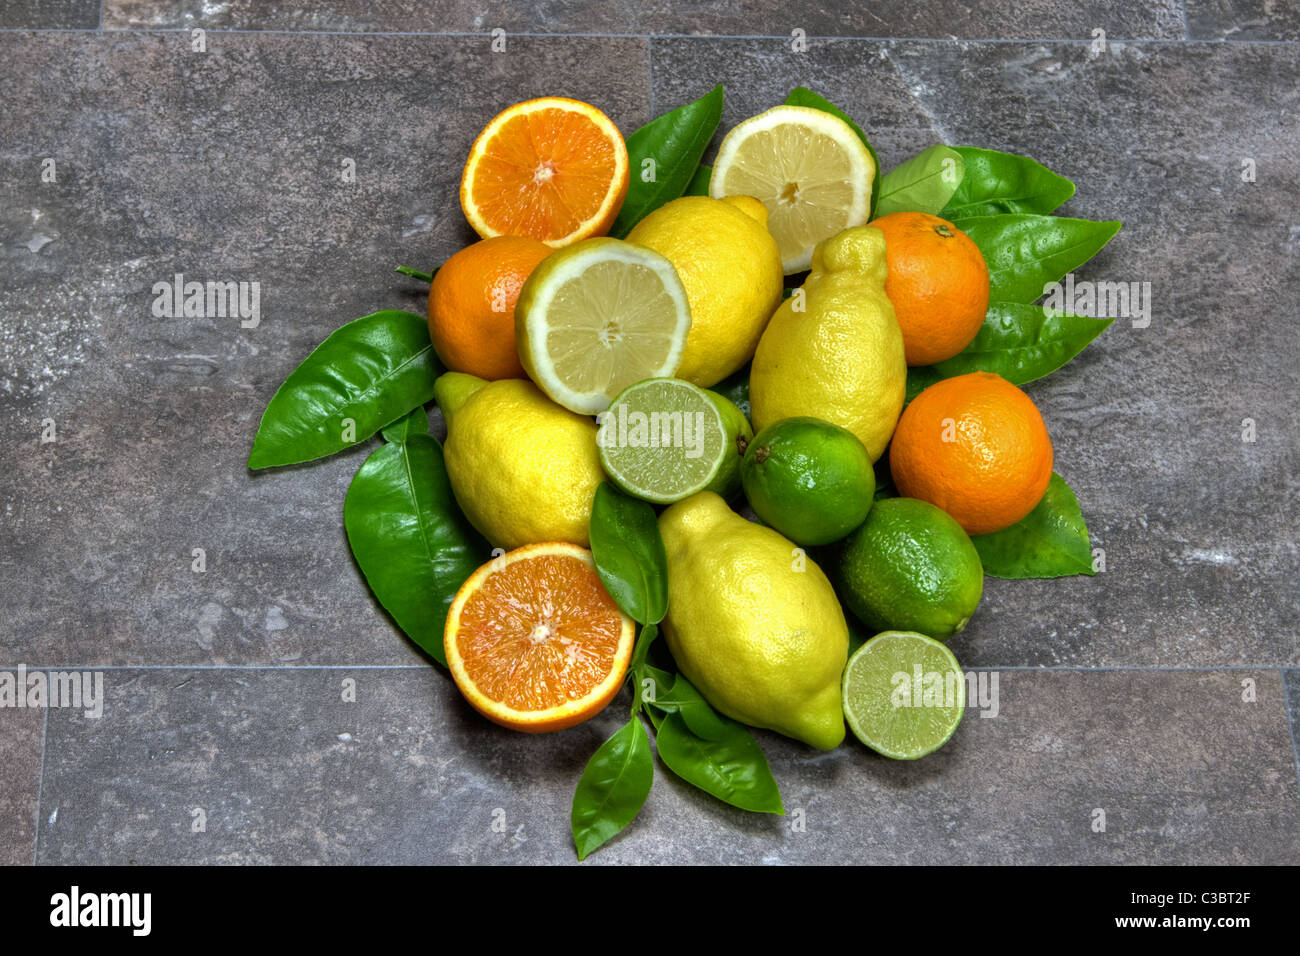 oranges and lemons with leaves Stock Photo